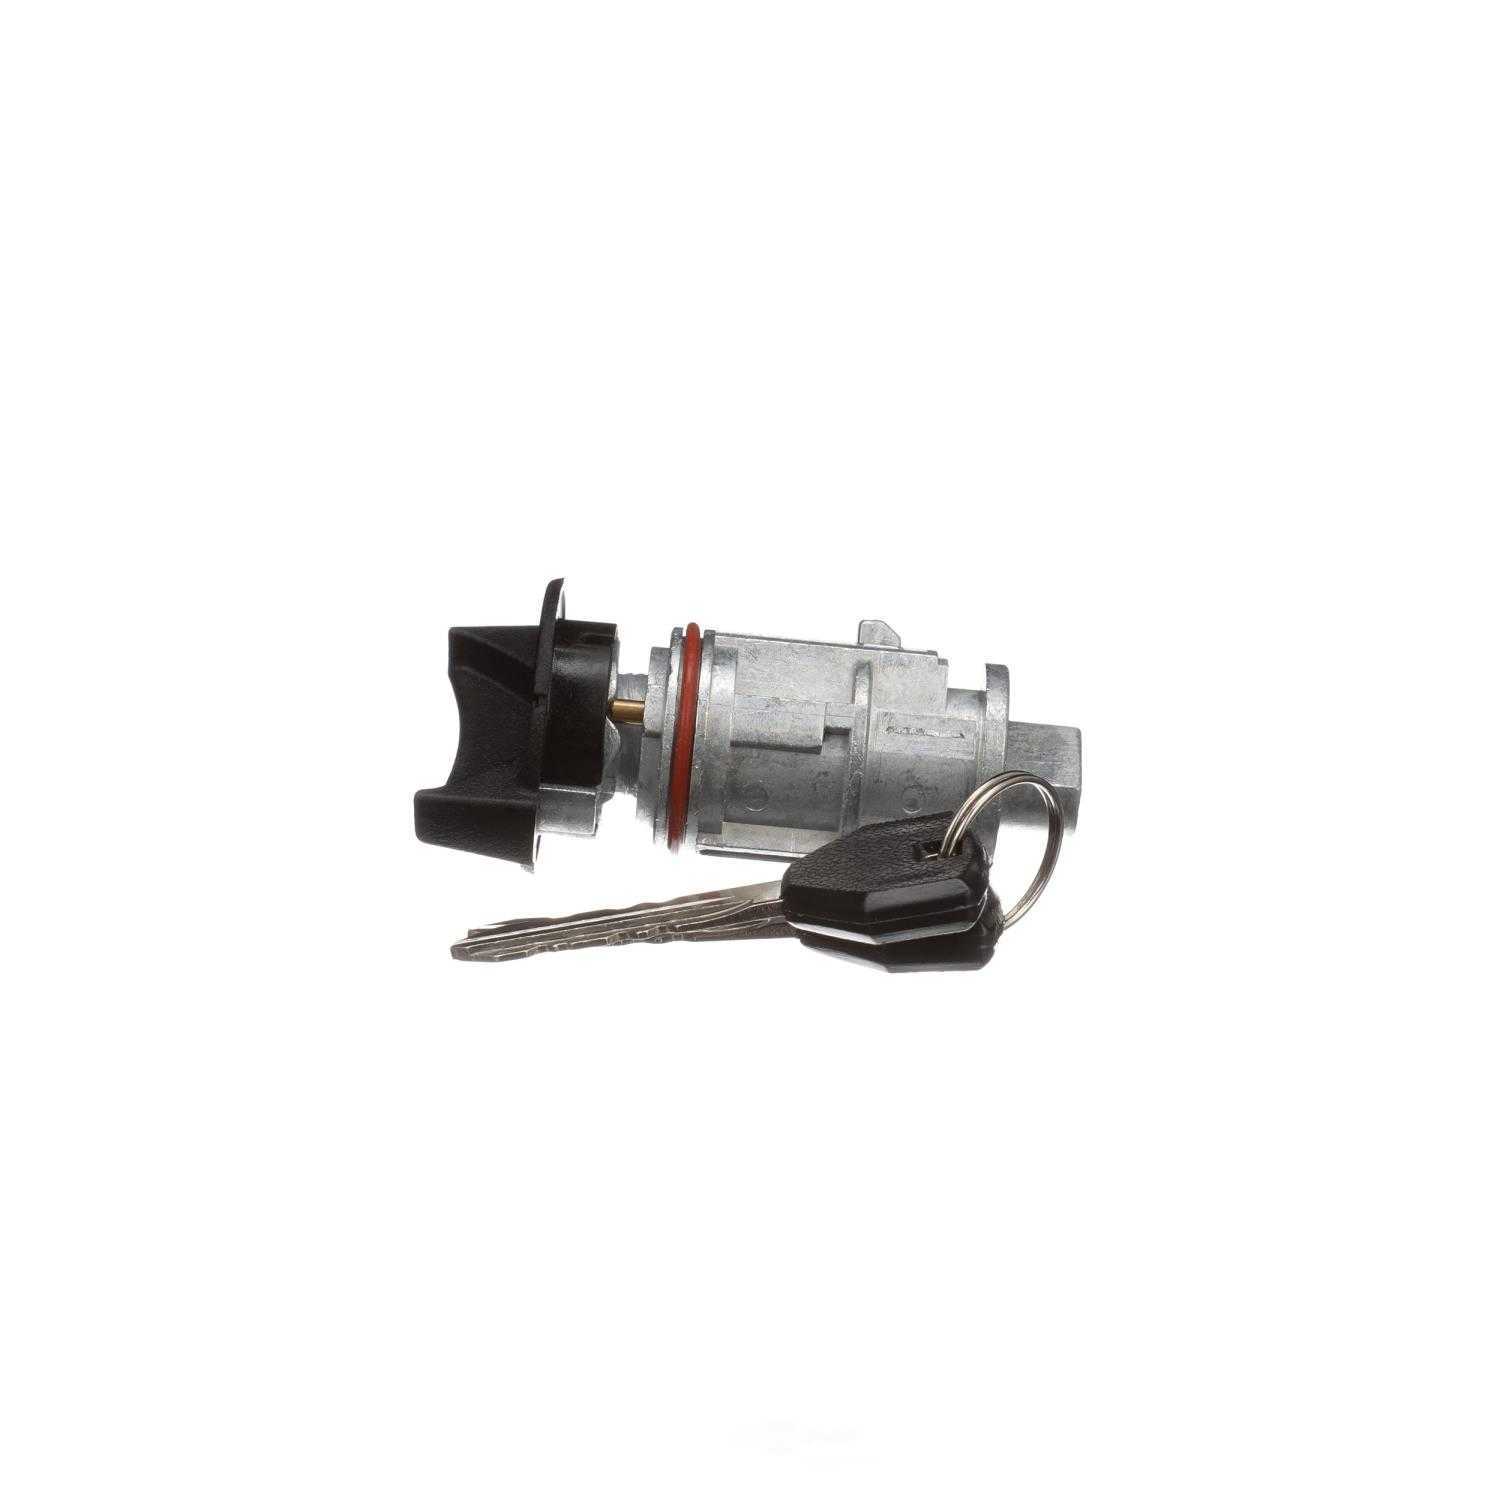 STANDARD MOTOR PRODUCTS - Ignition Lock Cylinder - STA US-231L